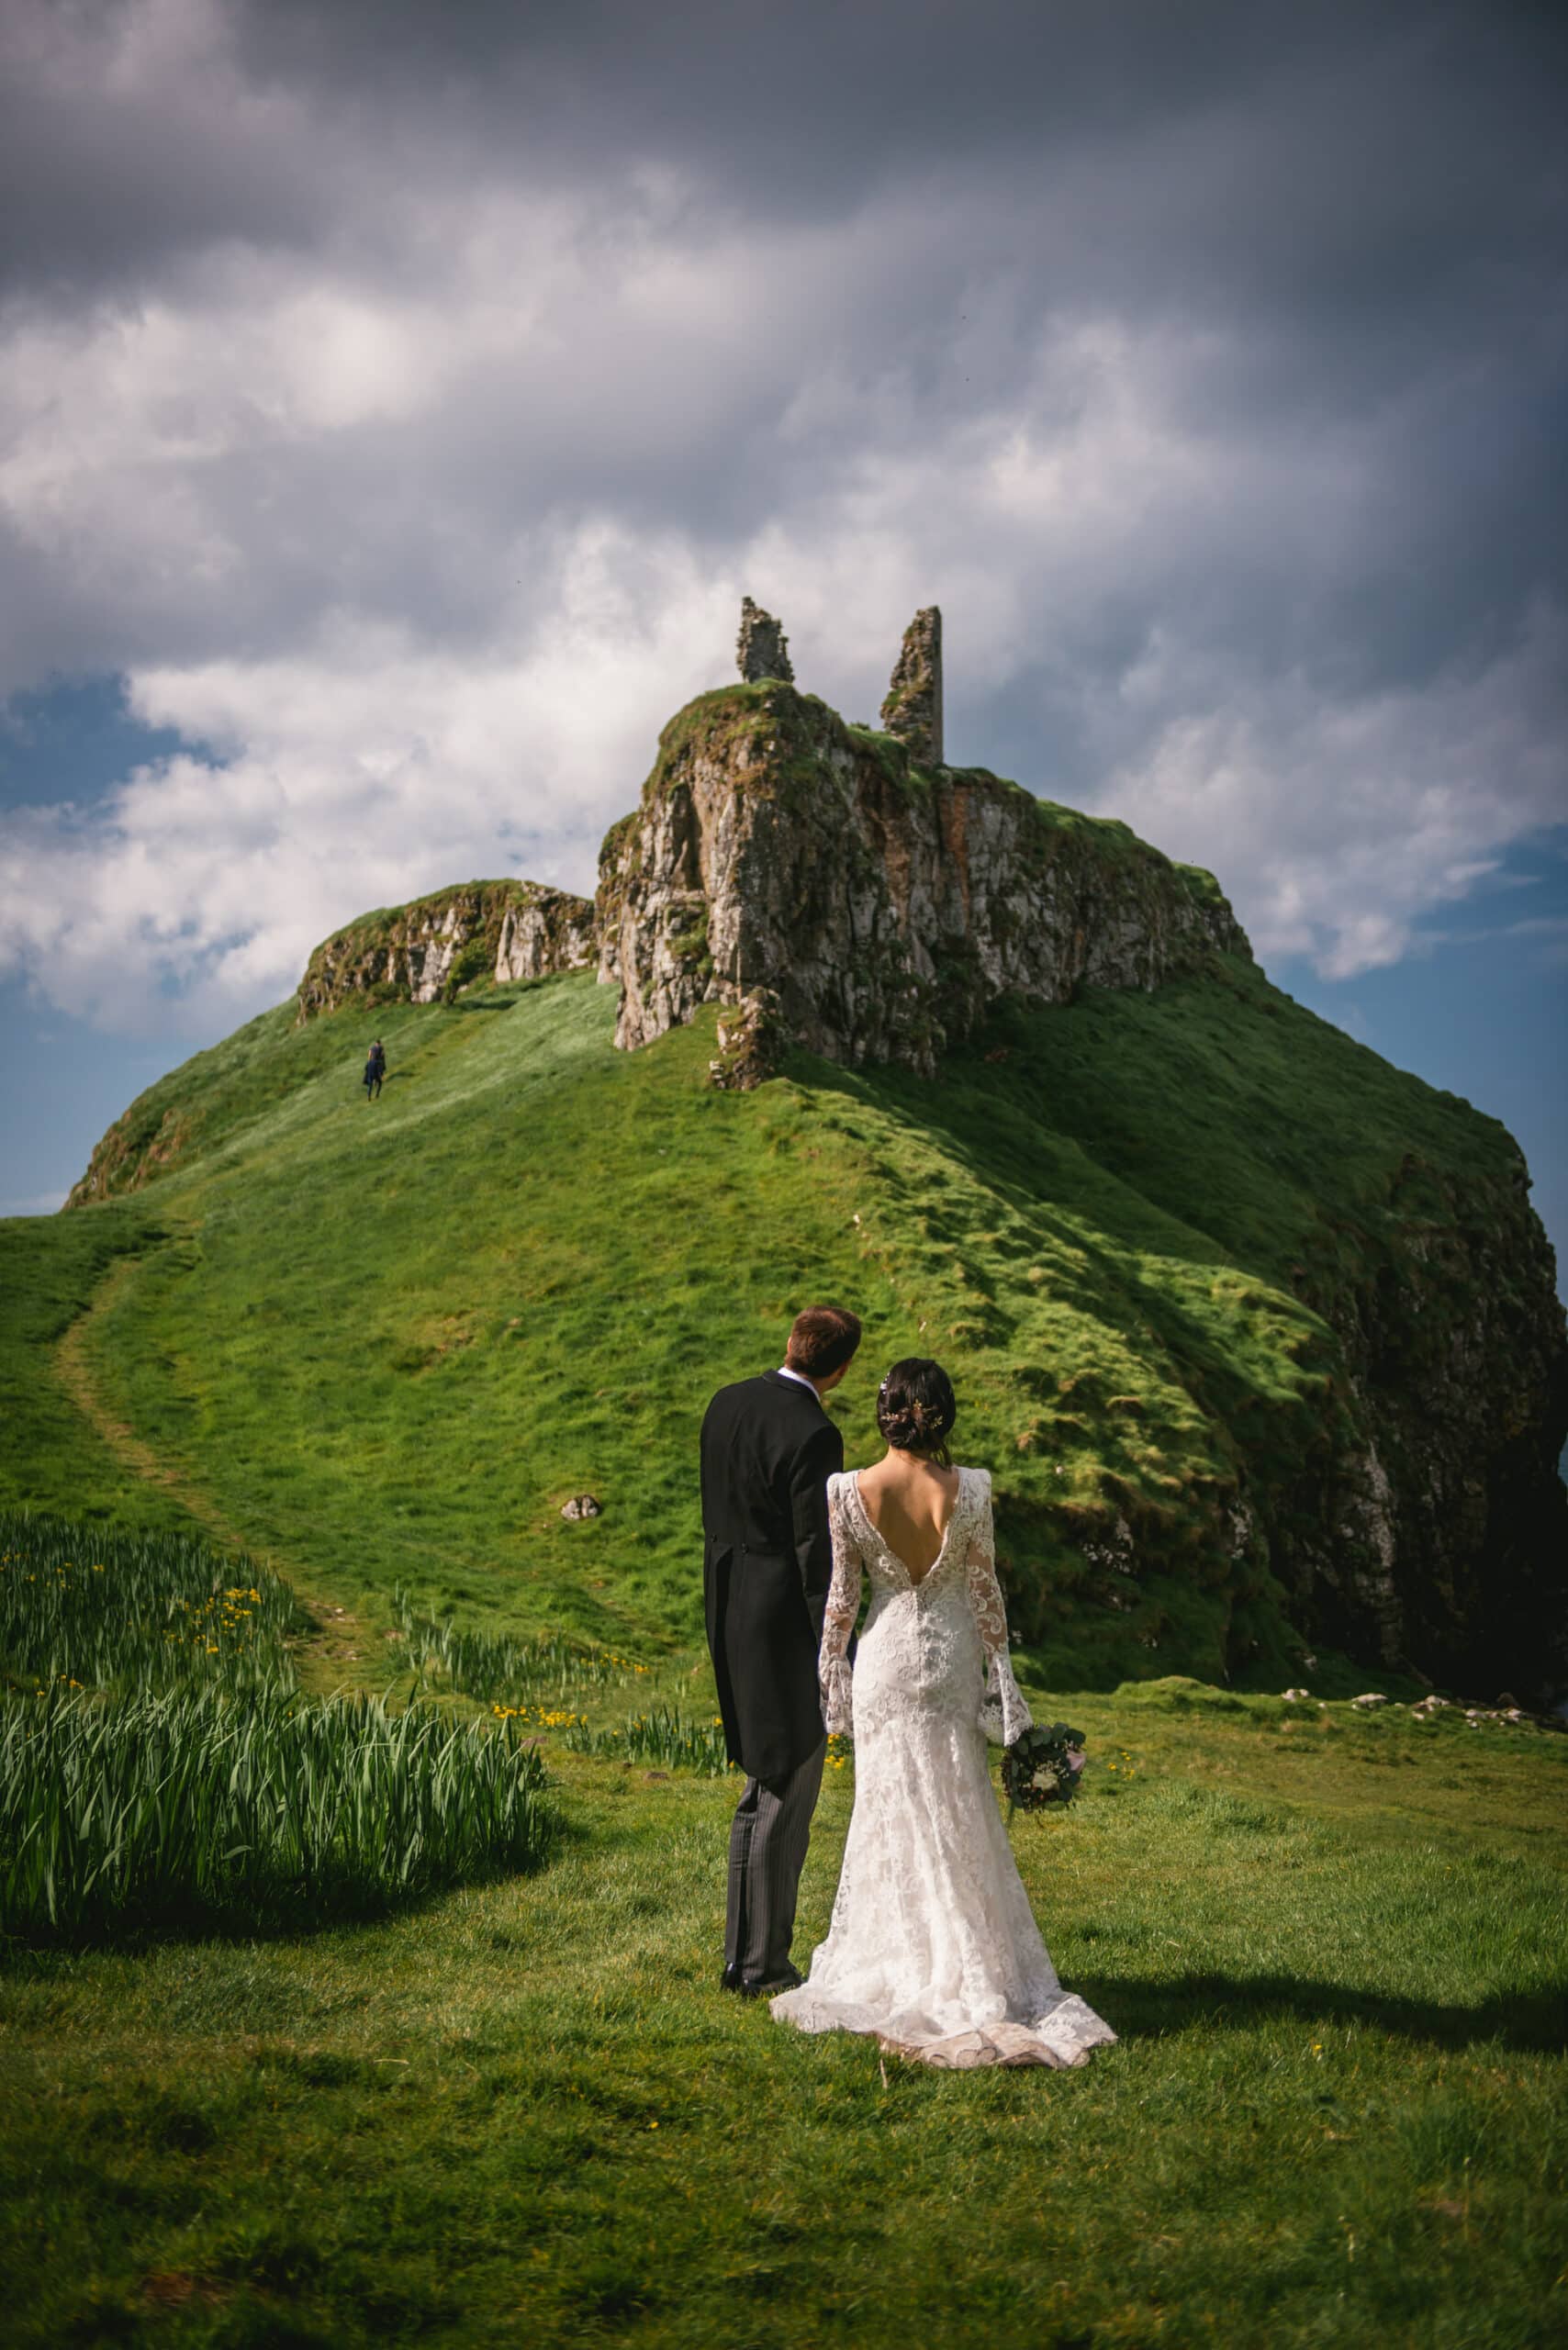 The couple standing in awe of the majestic landscape of Northern Ireland during their elopement.